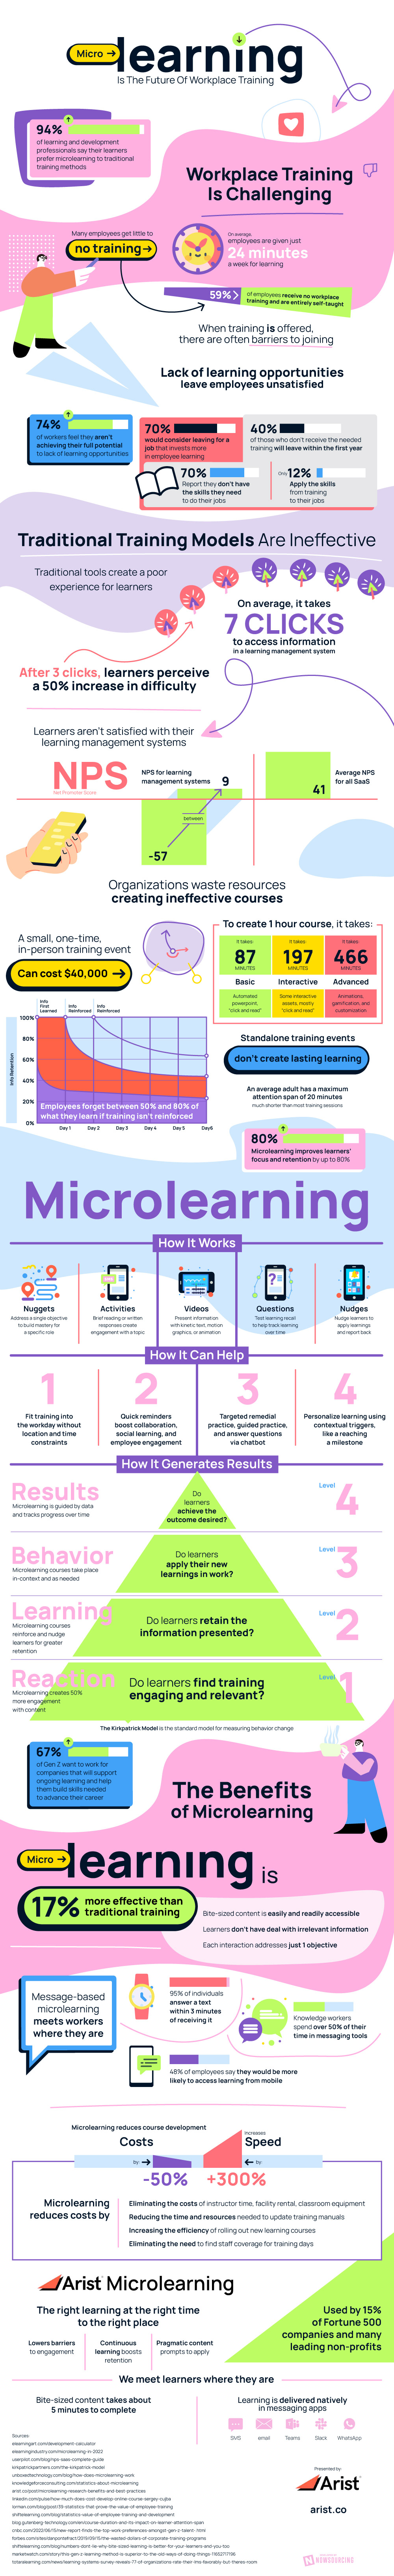 Infographic about microlearning in the workplace